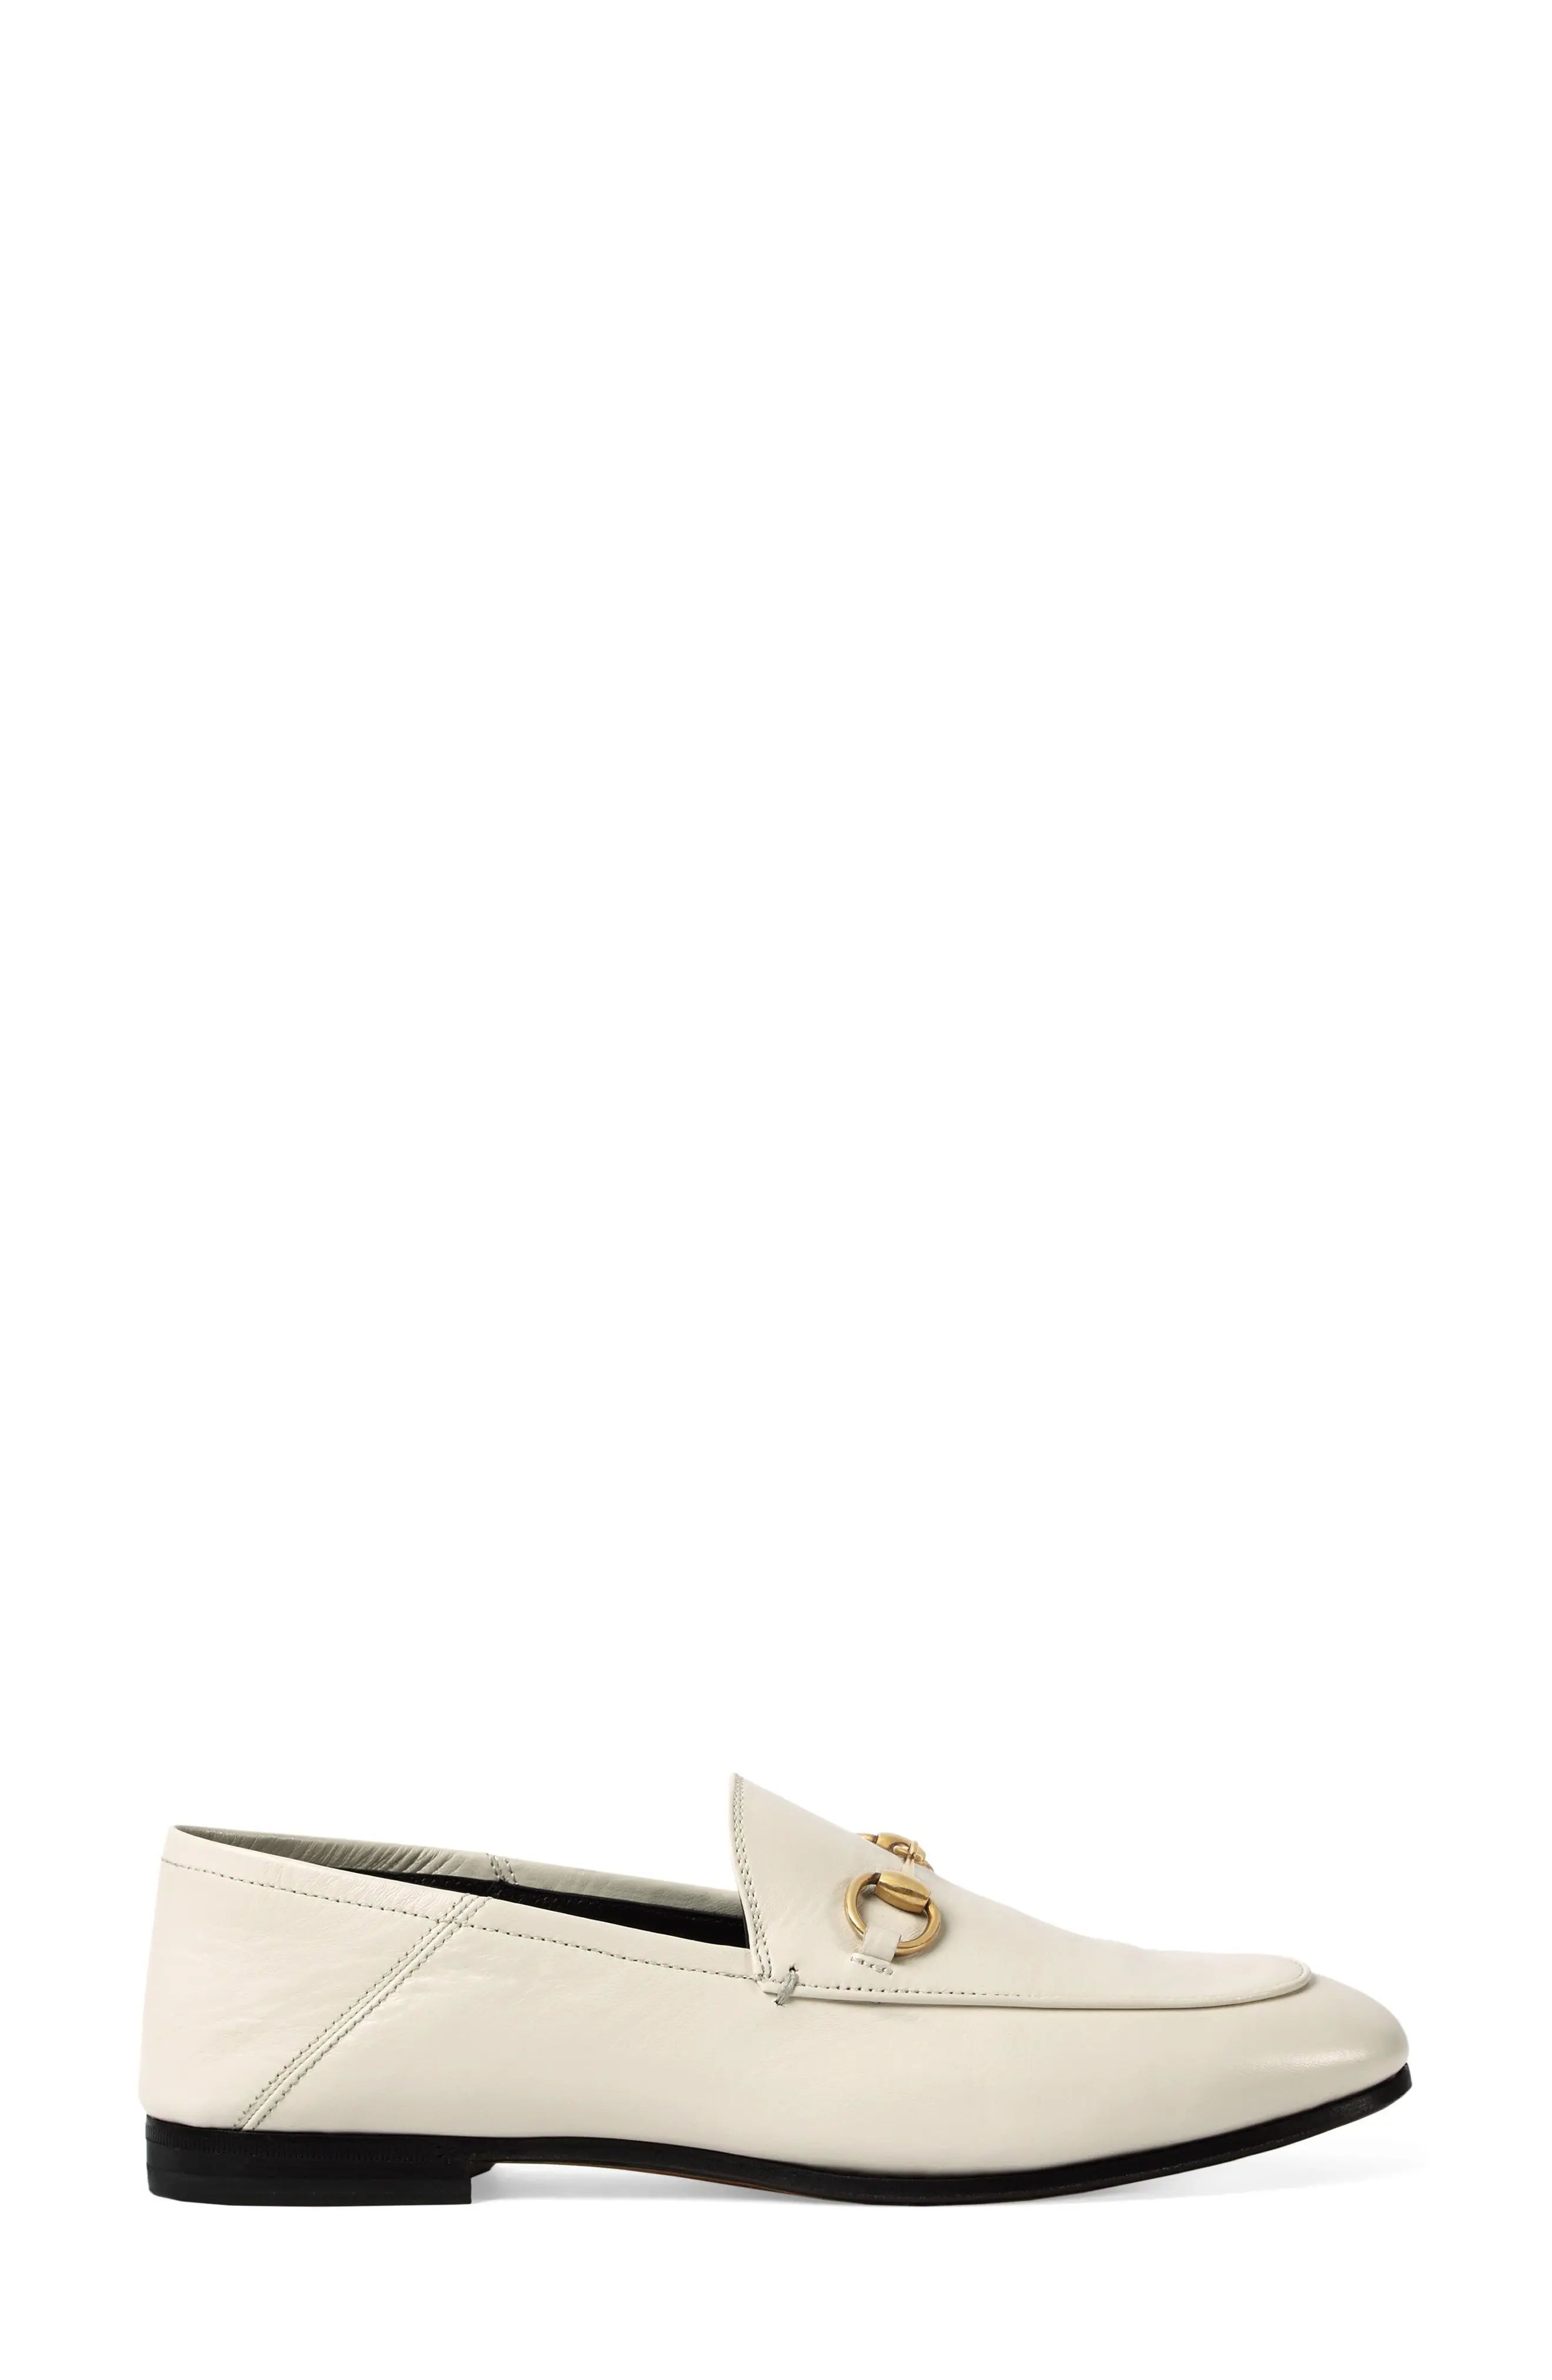 Women's Gucci Convertible Loafer, Size 10US / 40EU - White | Nordstrom